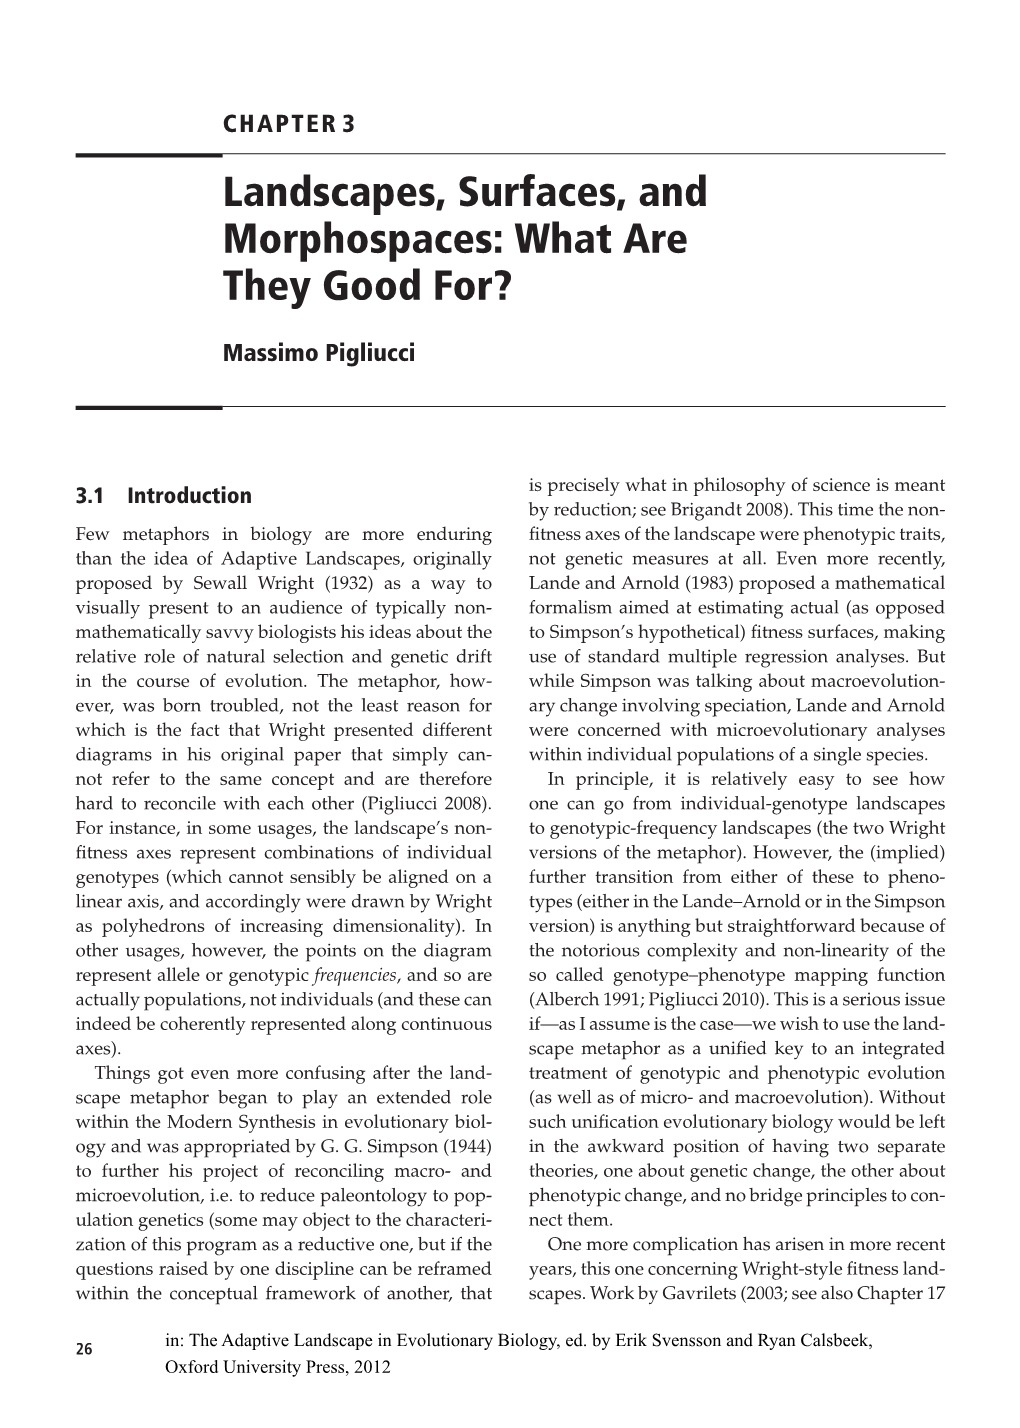 Landscapes, Surfaces, and Morphospaces: What Are They Good For?